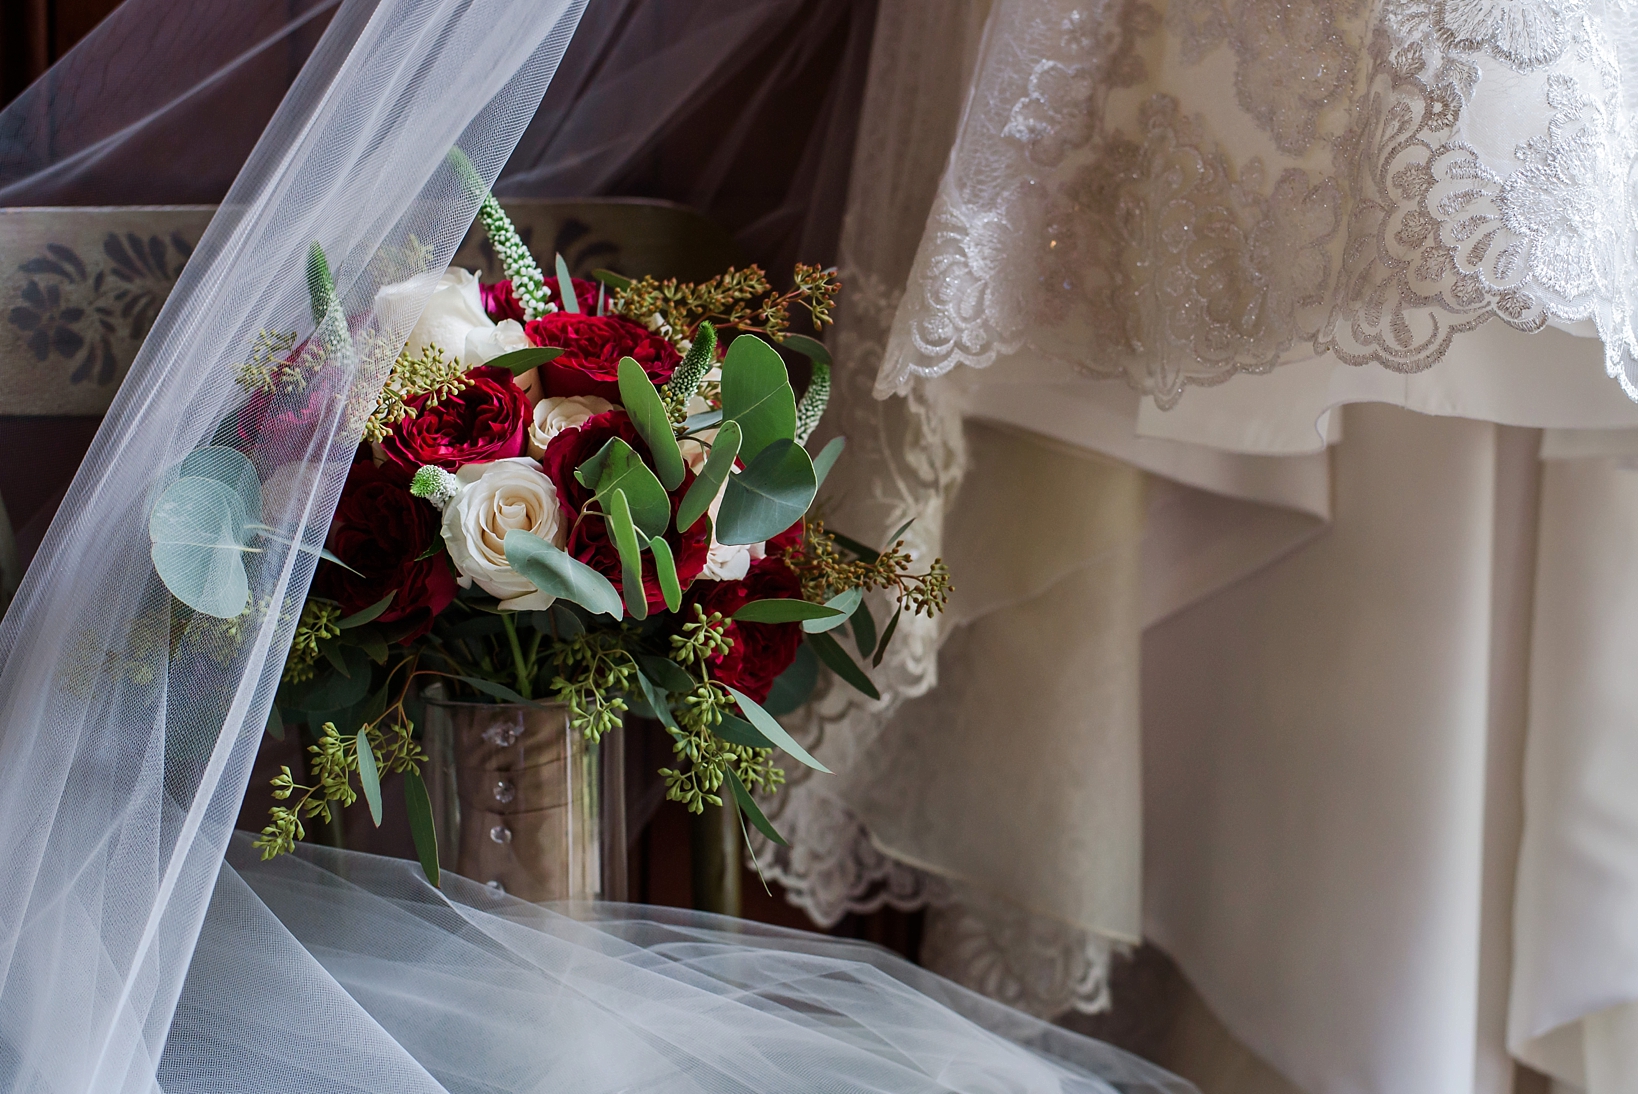 The Bride's full floral bouquet with a hint of the wedding dress in Dunedin, Fl's Anderson Memorial Chapel